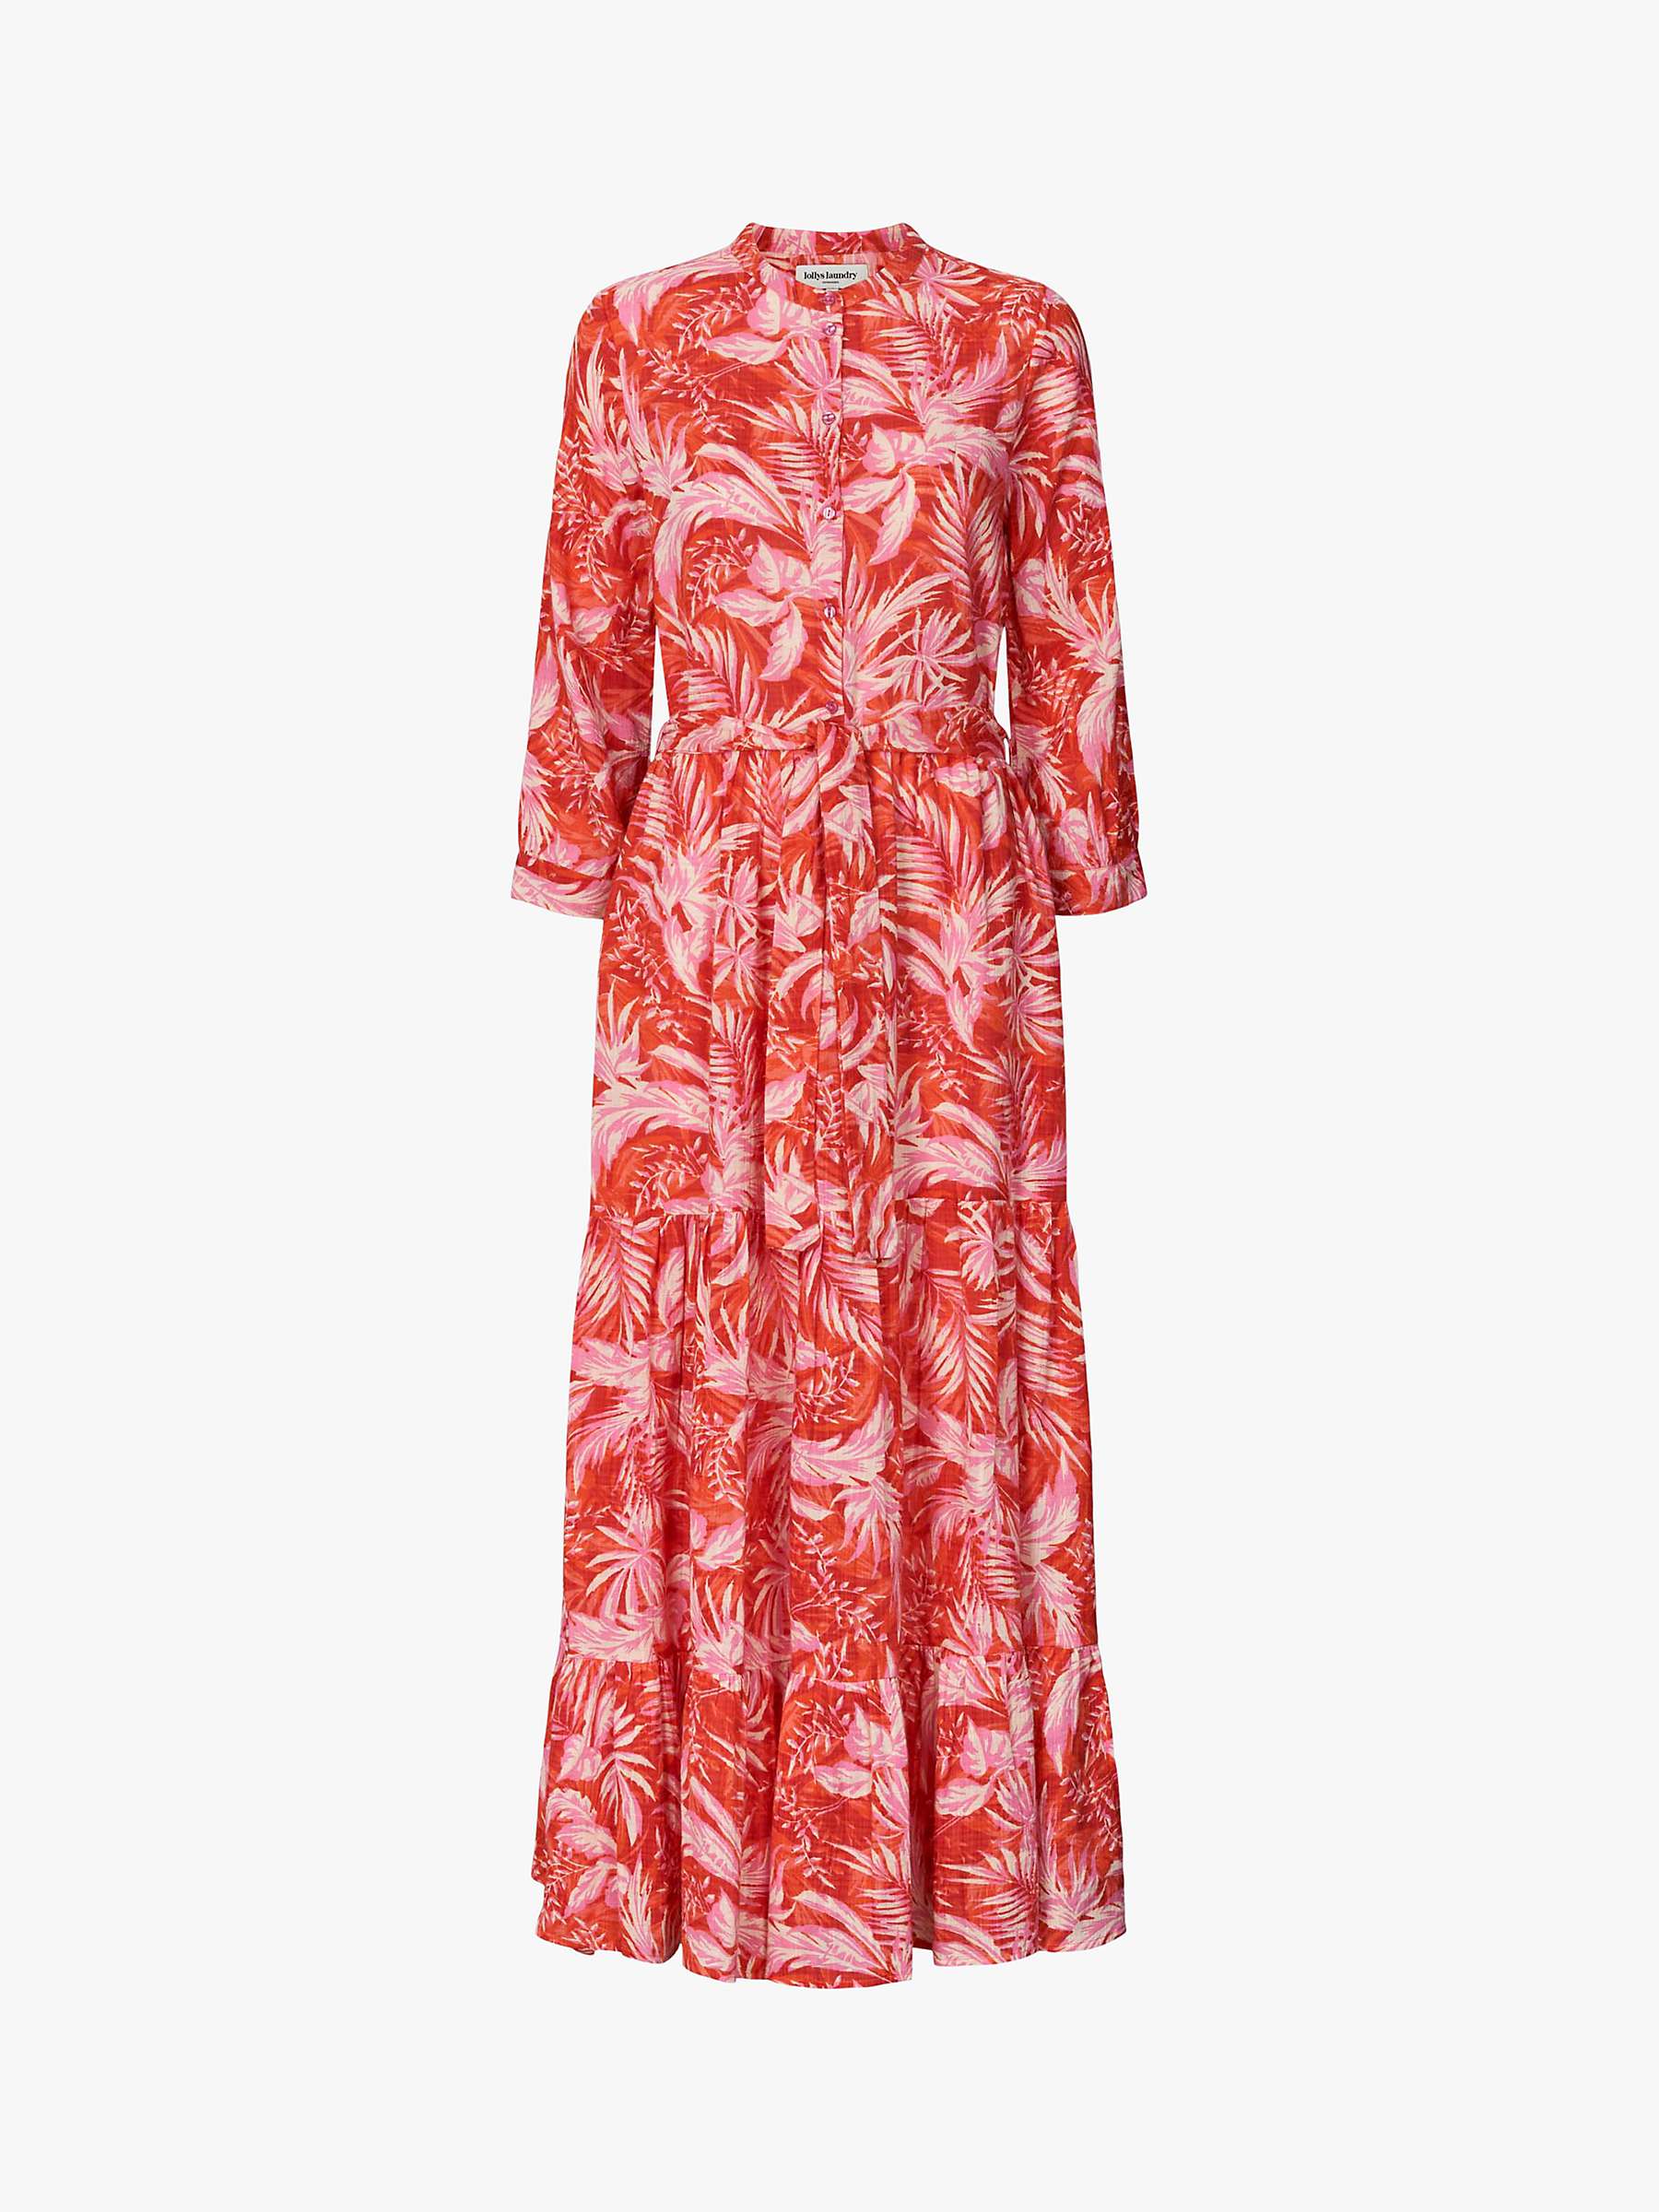 Buy Lollys Laundry Nee 3/4 Sleeve Maxi Dress Nee, Red Online at johnlewis.com